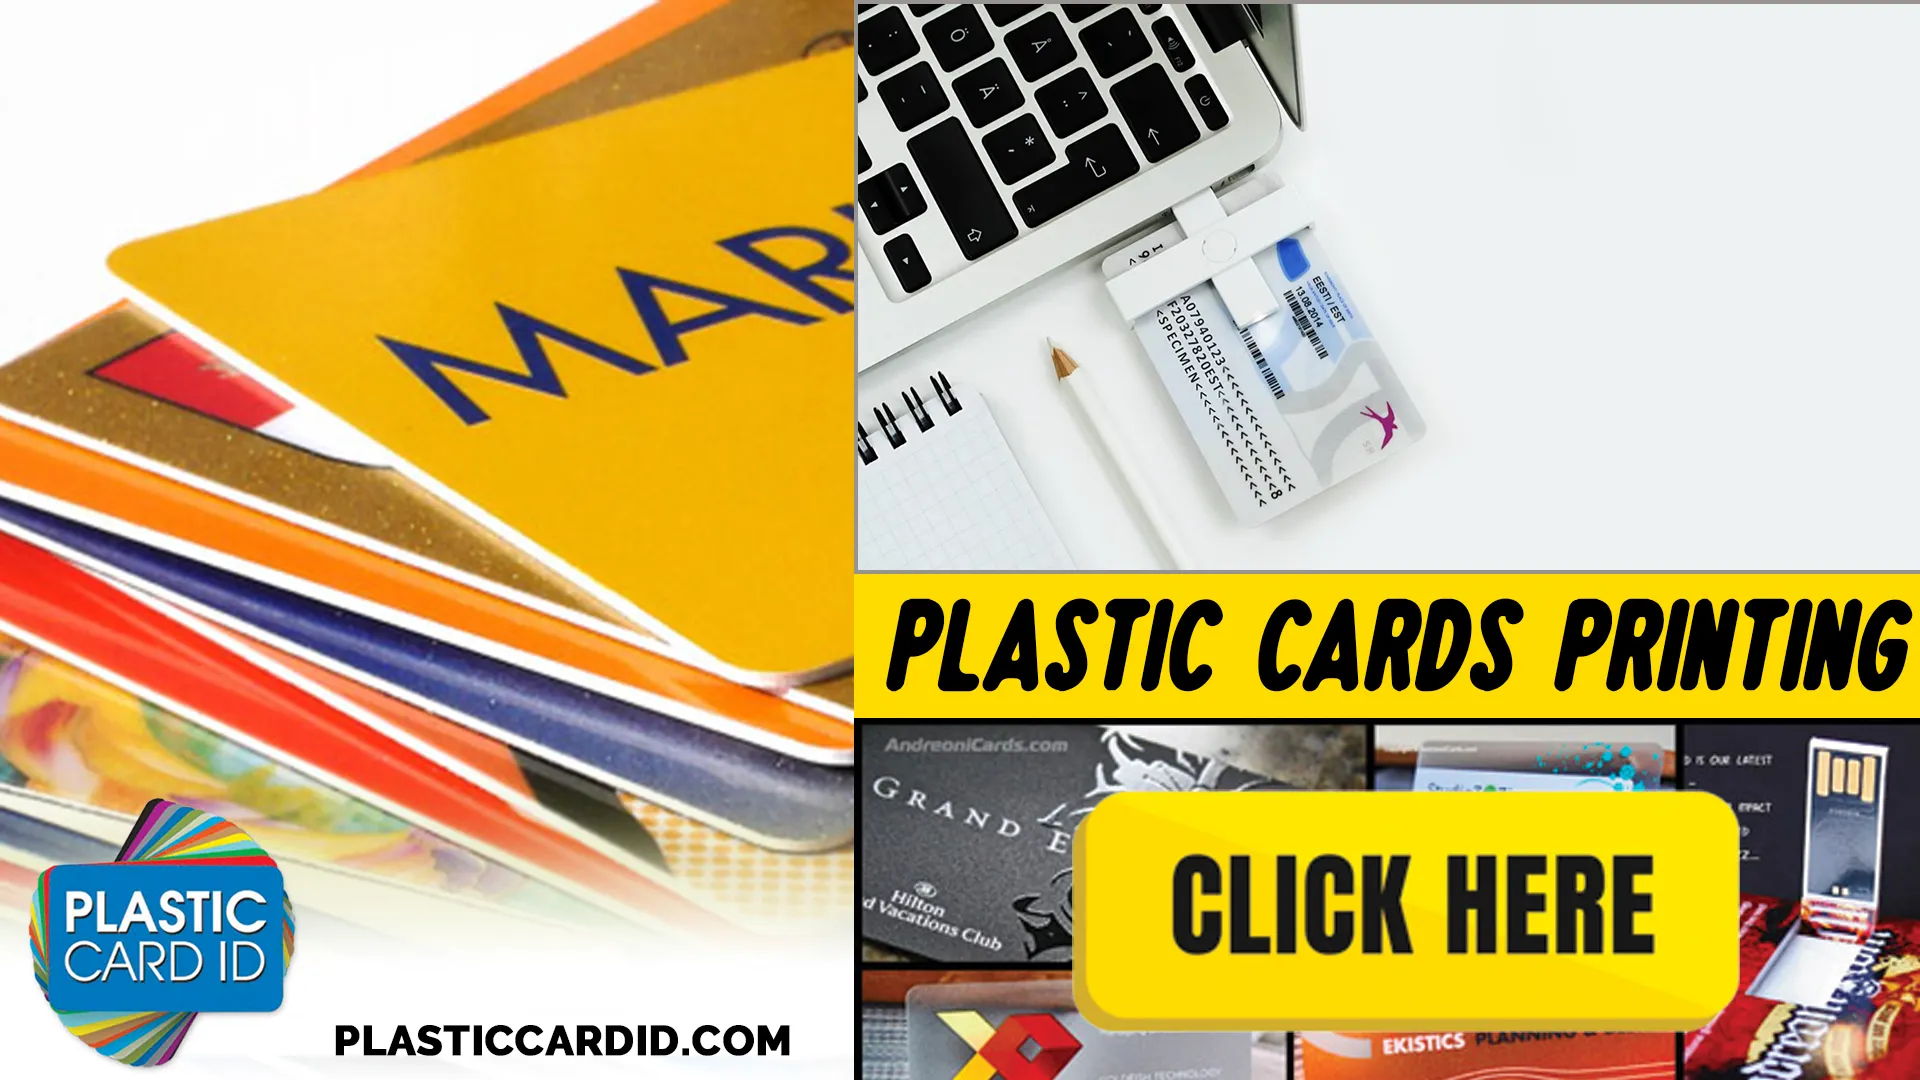 Welcome to the World of Customized Branding in Plastic Card Design